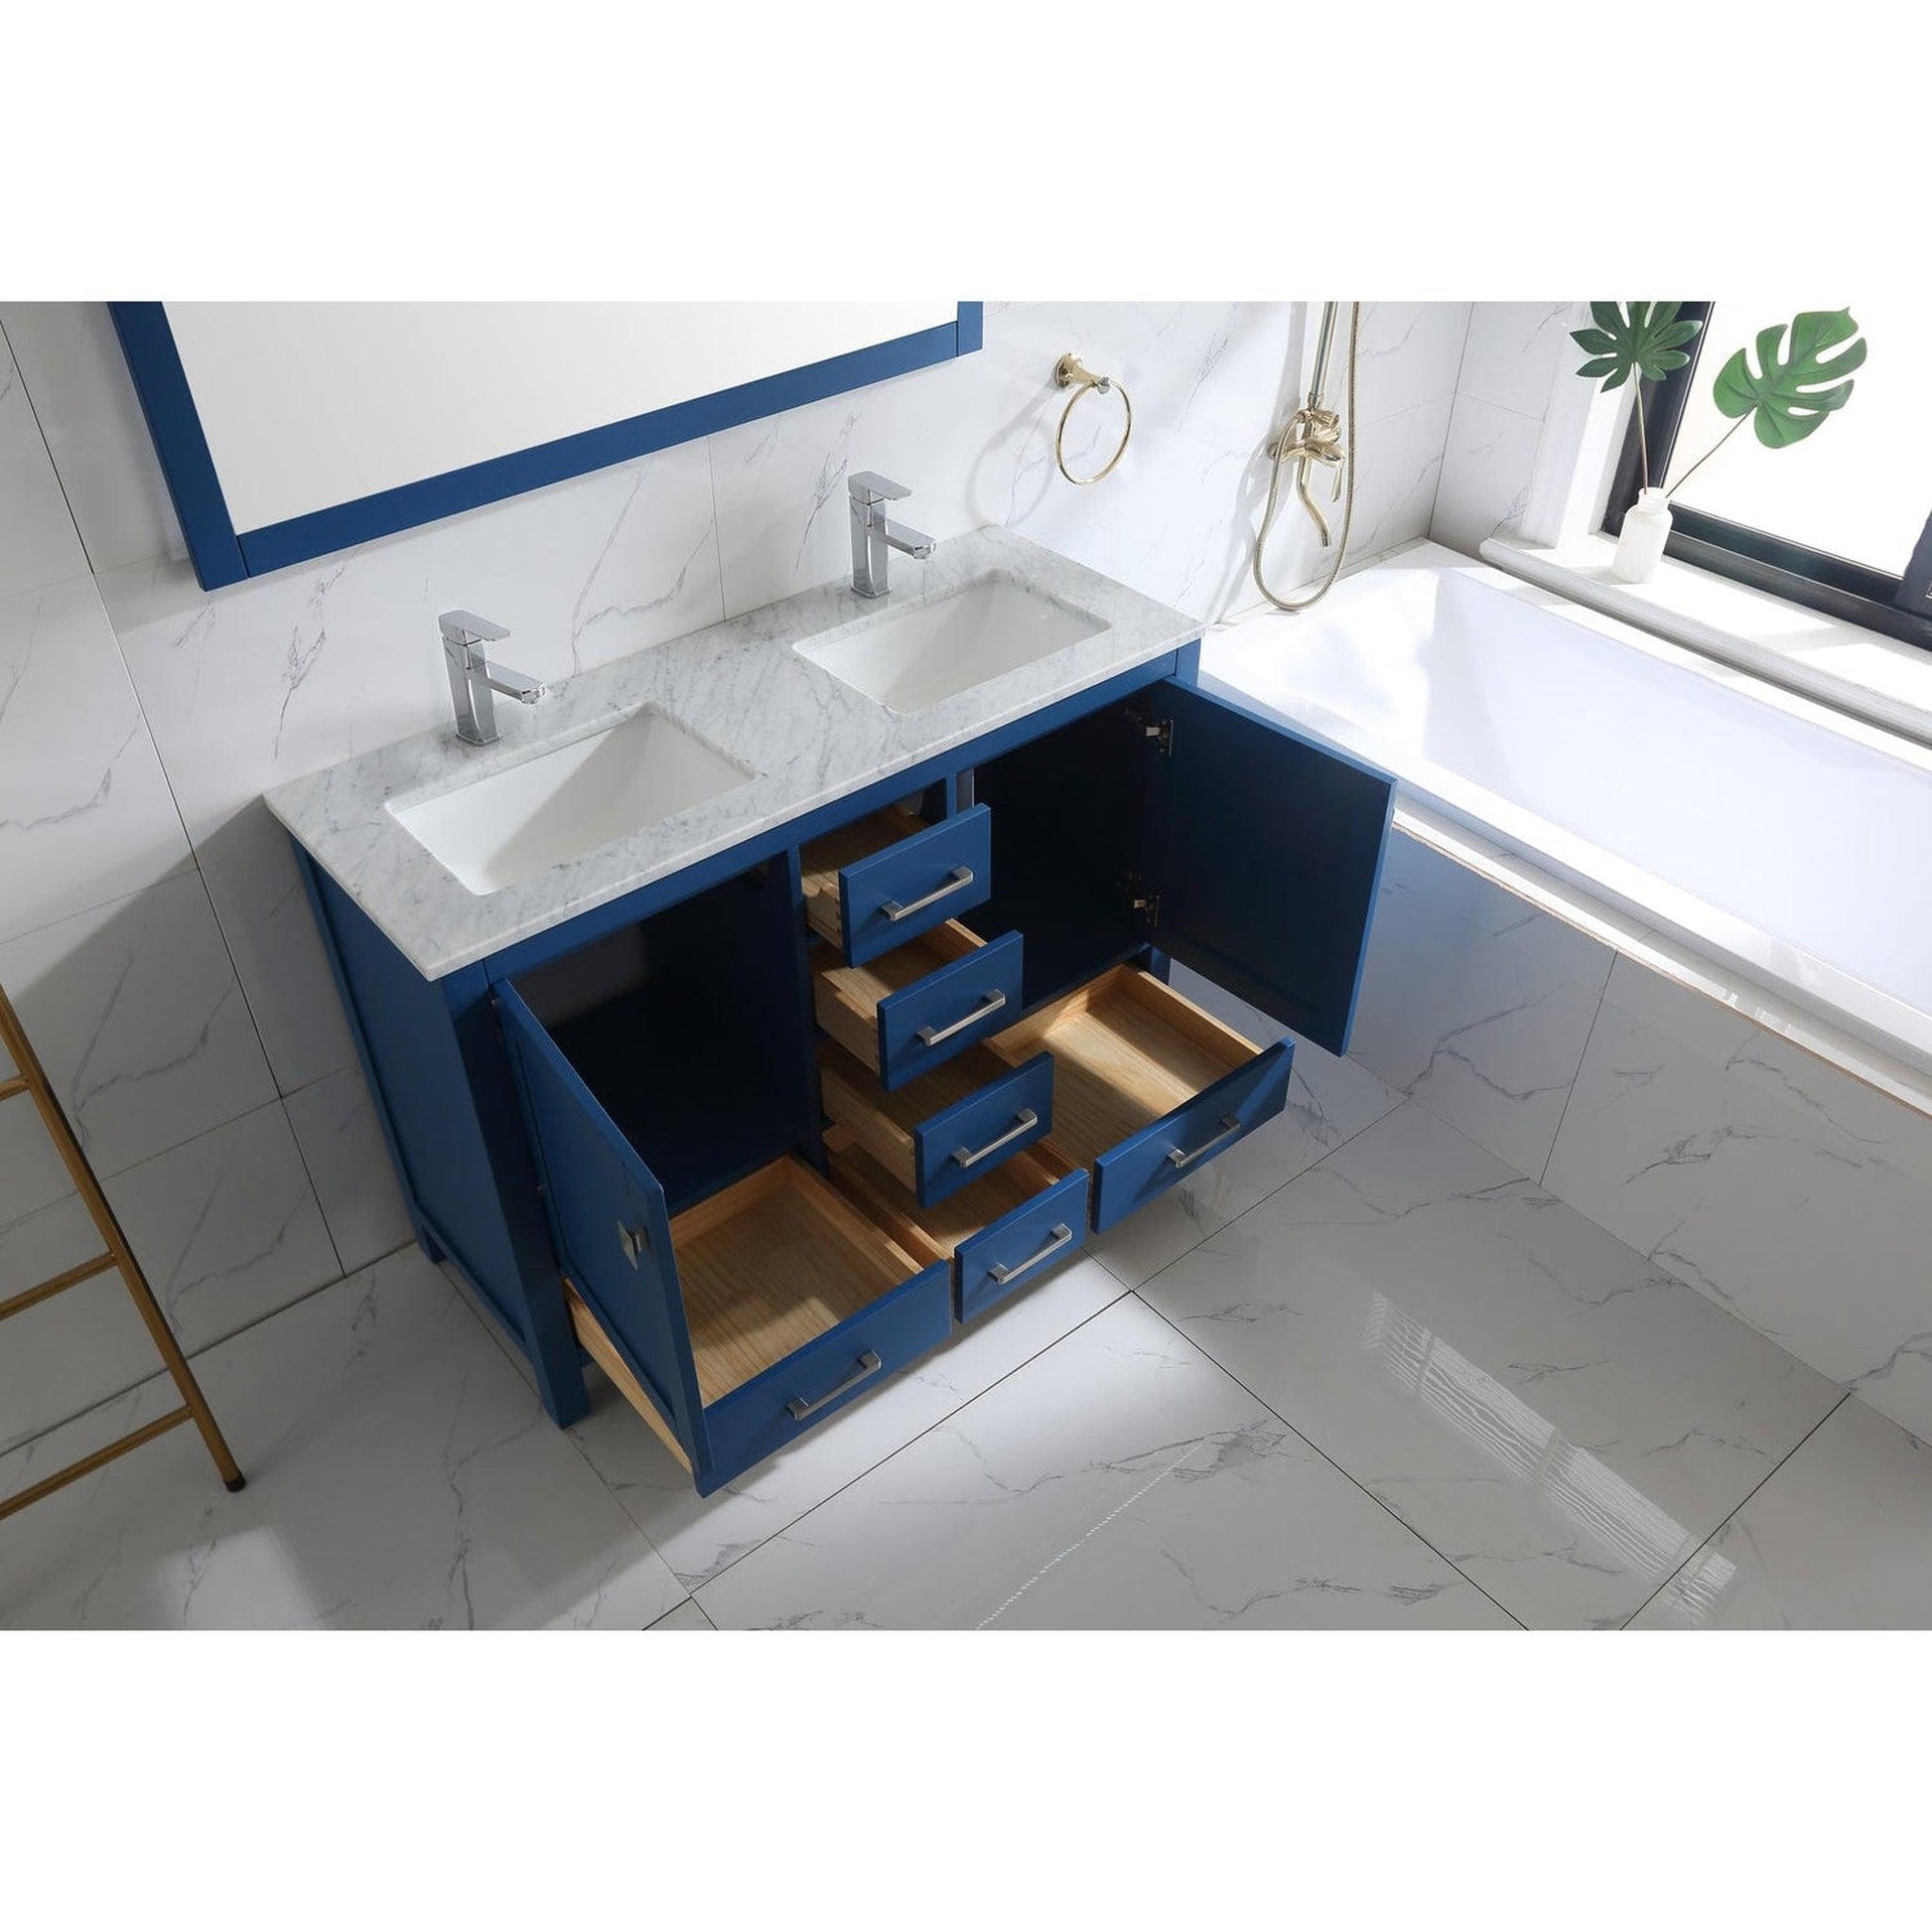 Eviva London 48" x 34" Blue Freestanding Double Bathroom Vanity Sink With Brushed Chrome Handles and Carrara Marble Countertop